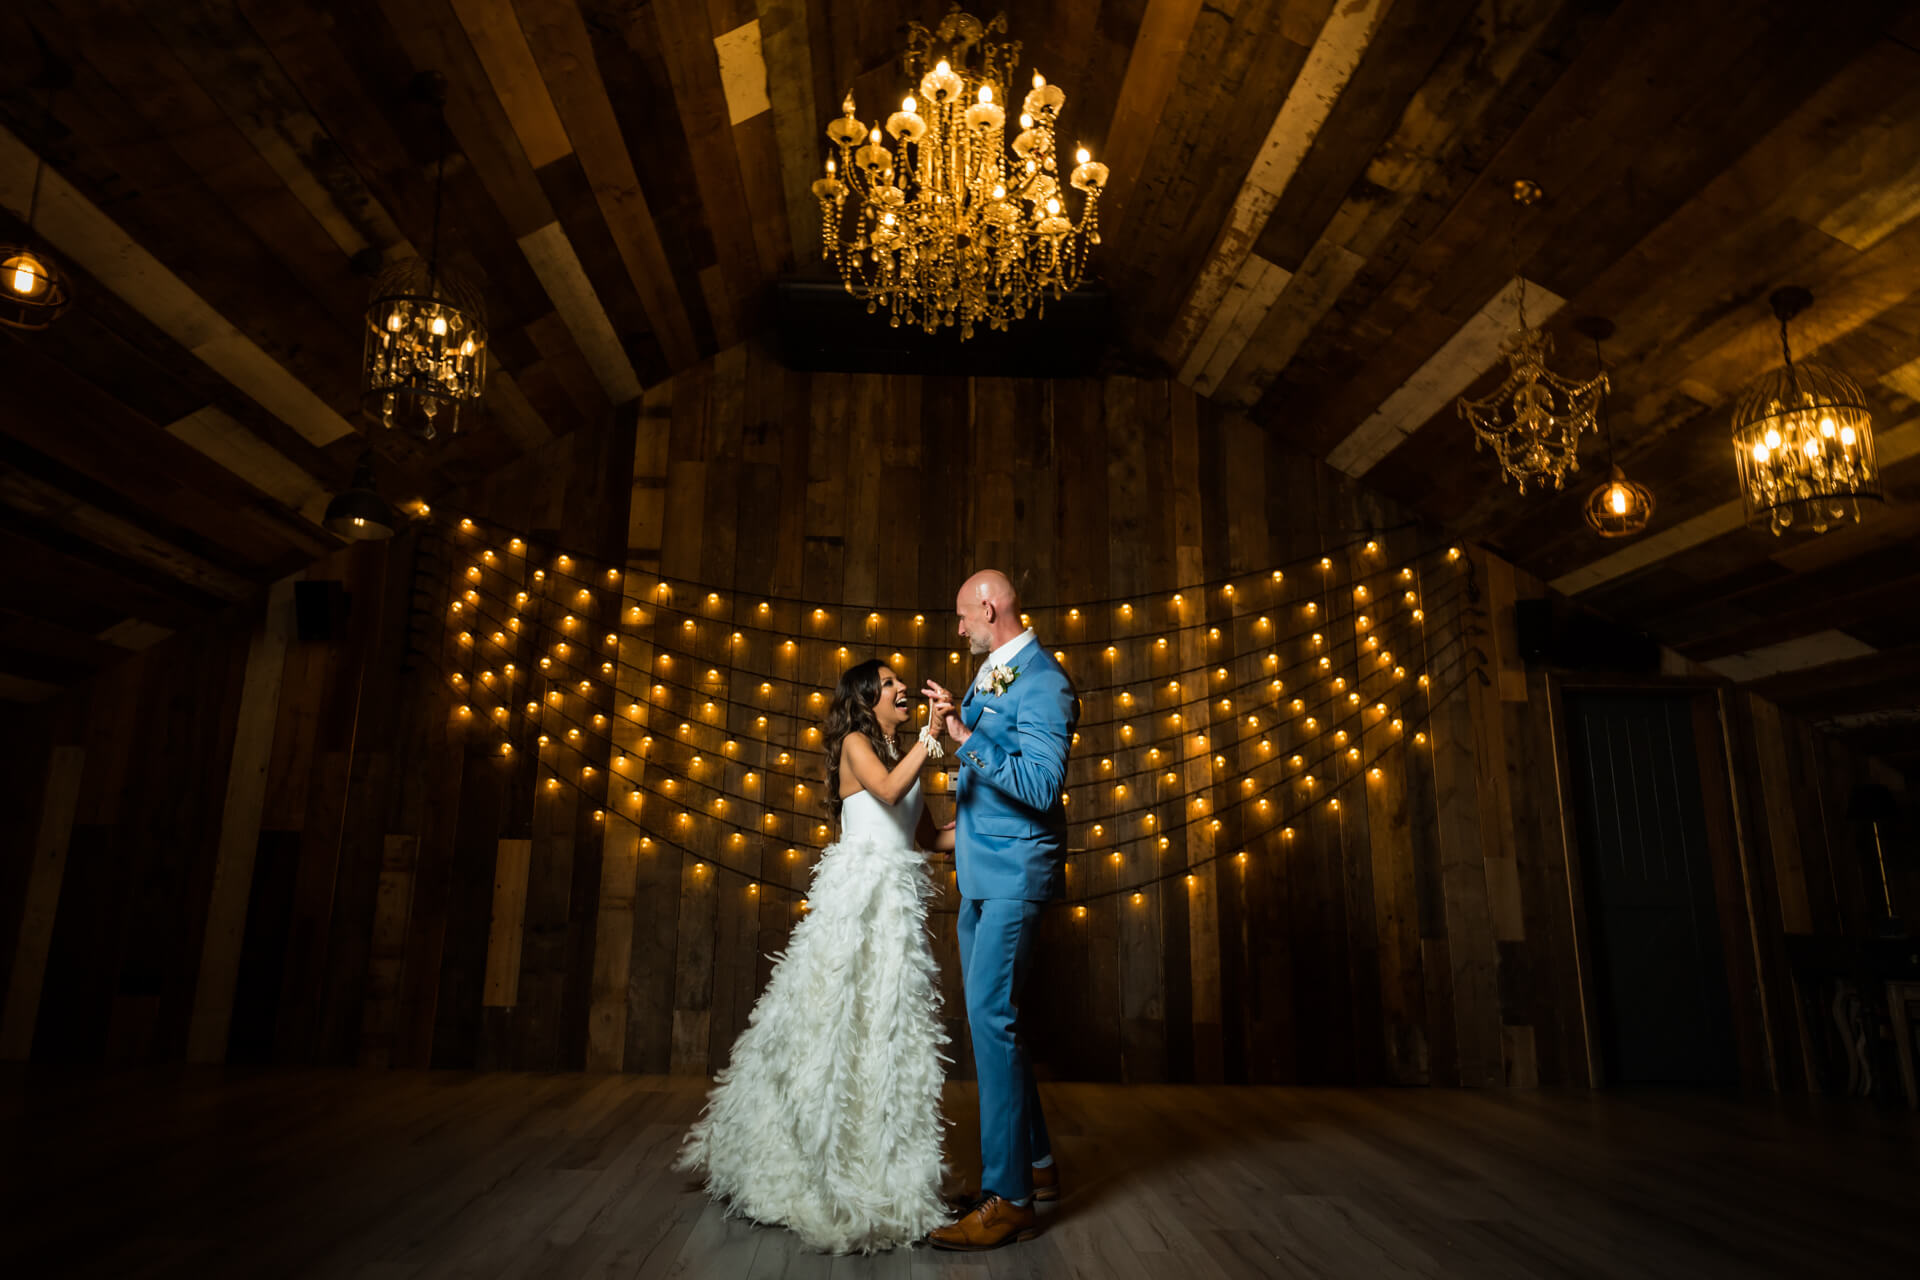 Couple dancing at rustic wedding venue with chandeliers.